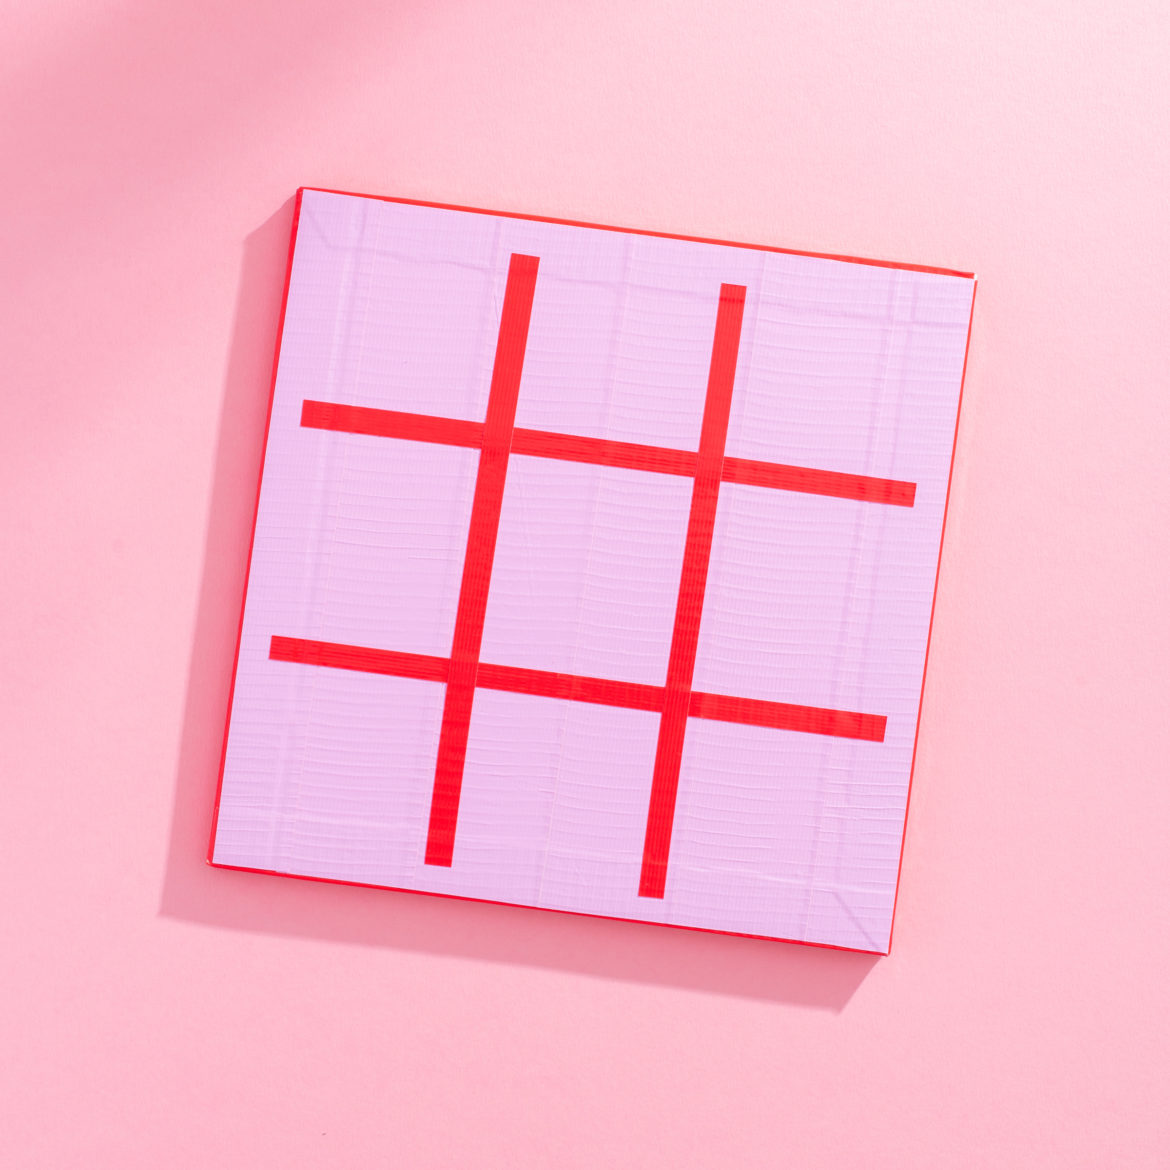 Create a 3x3 grid with red Duck Tape on the surface of the foam squares